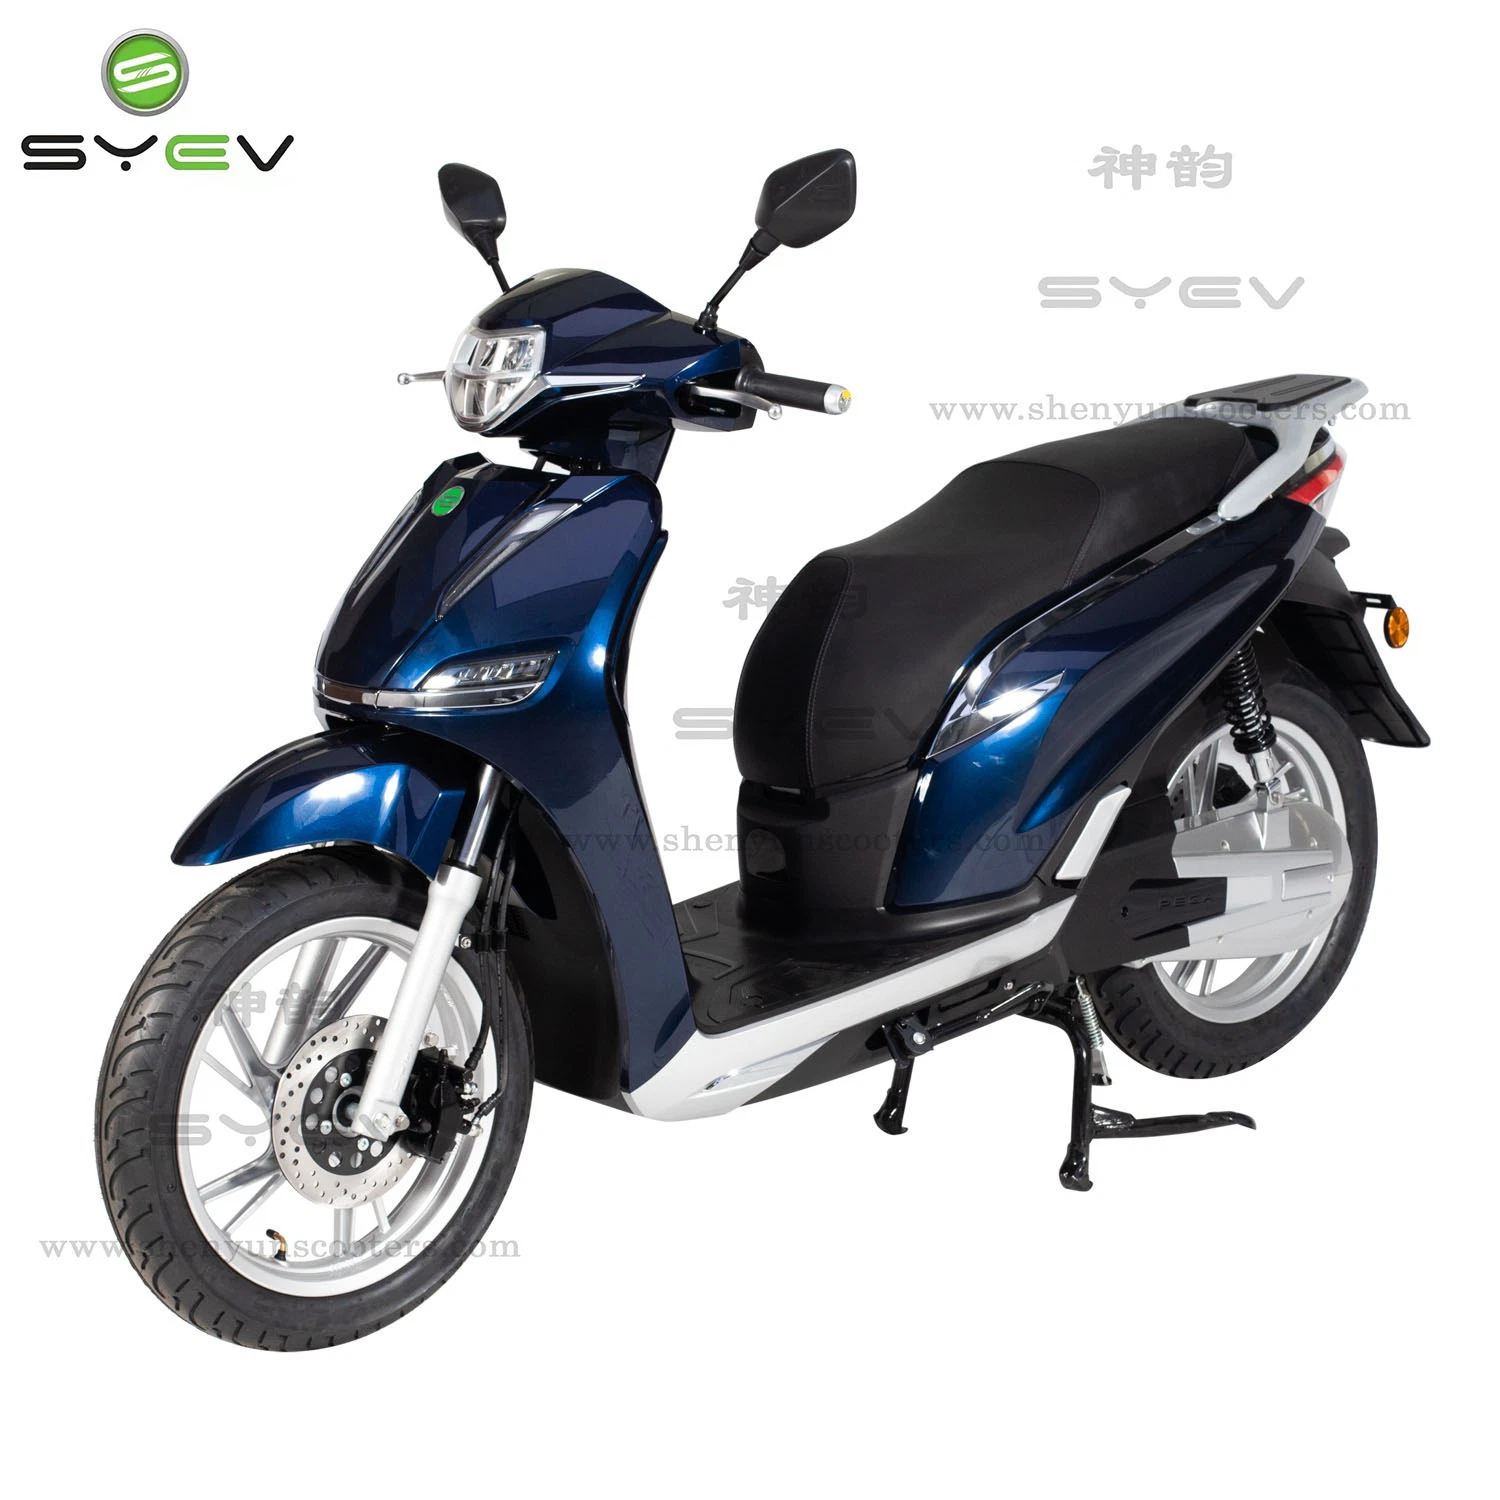 Approved EEC Coc 72V High Powerful 3000W MID Drive Electric Motorcycle Electric Scooter E-Dirt Bike Electric off Road Motorcycle E Bike with Removable Battery